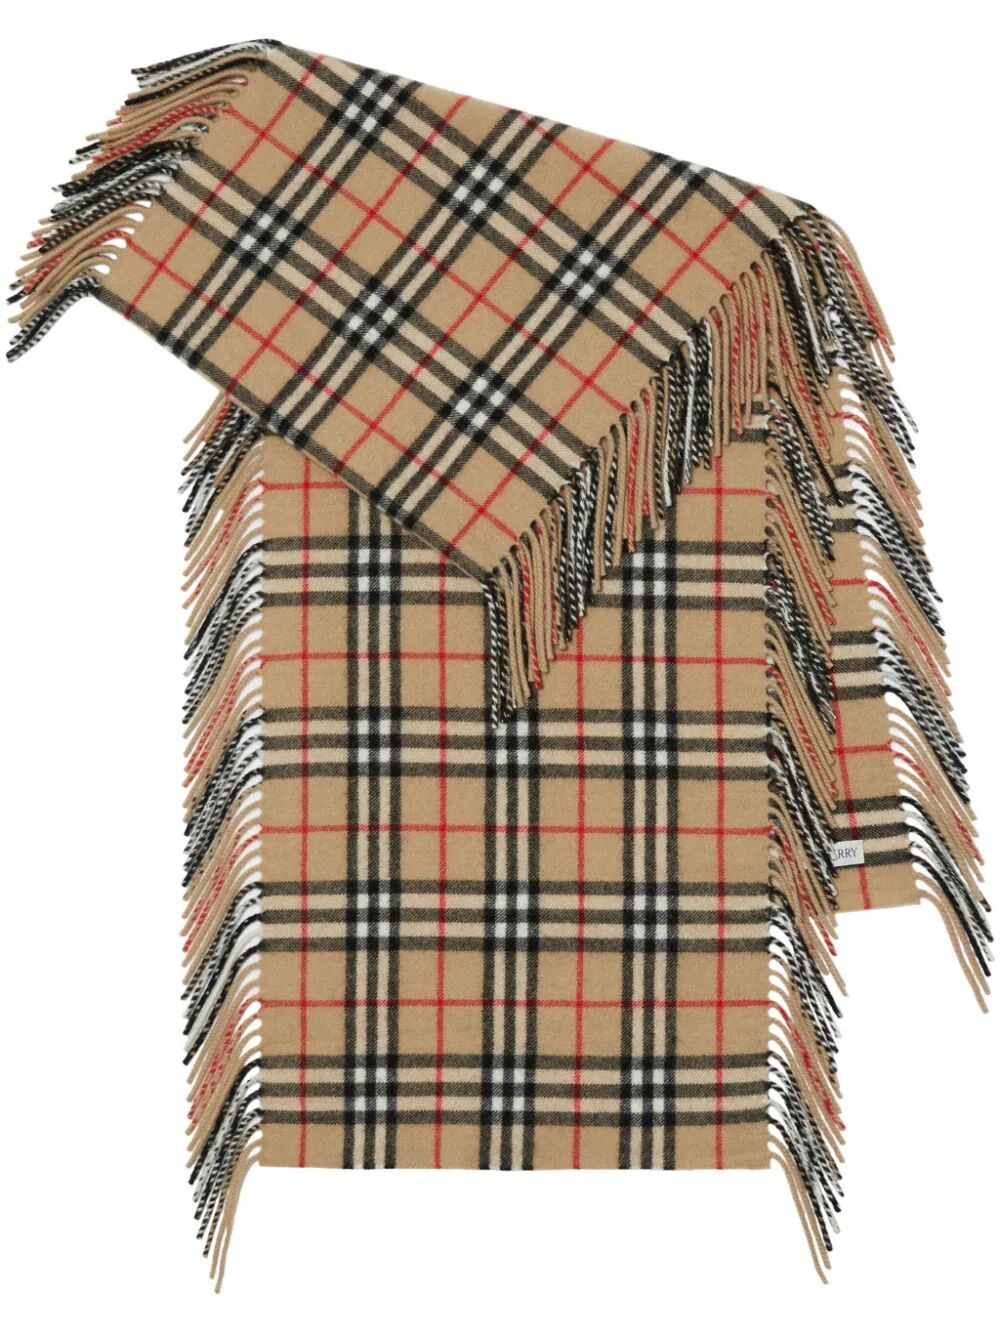 BURBERRY LONDON ENGLAND CHECK SCARF WITH FRINGES